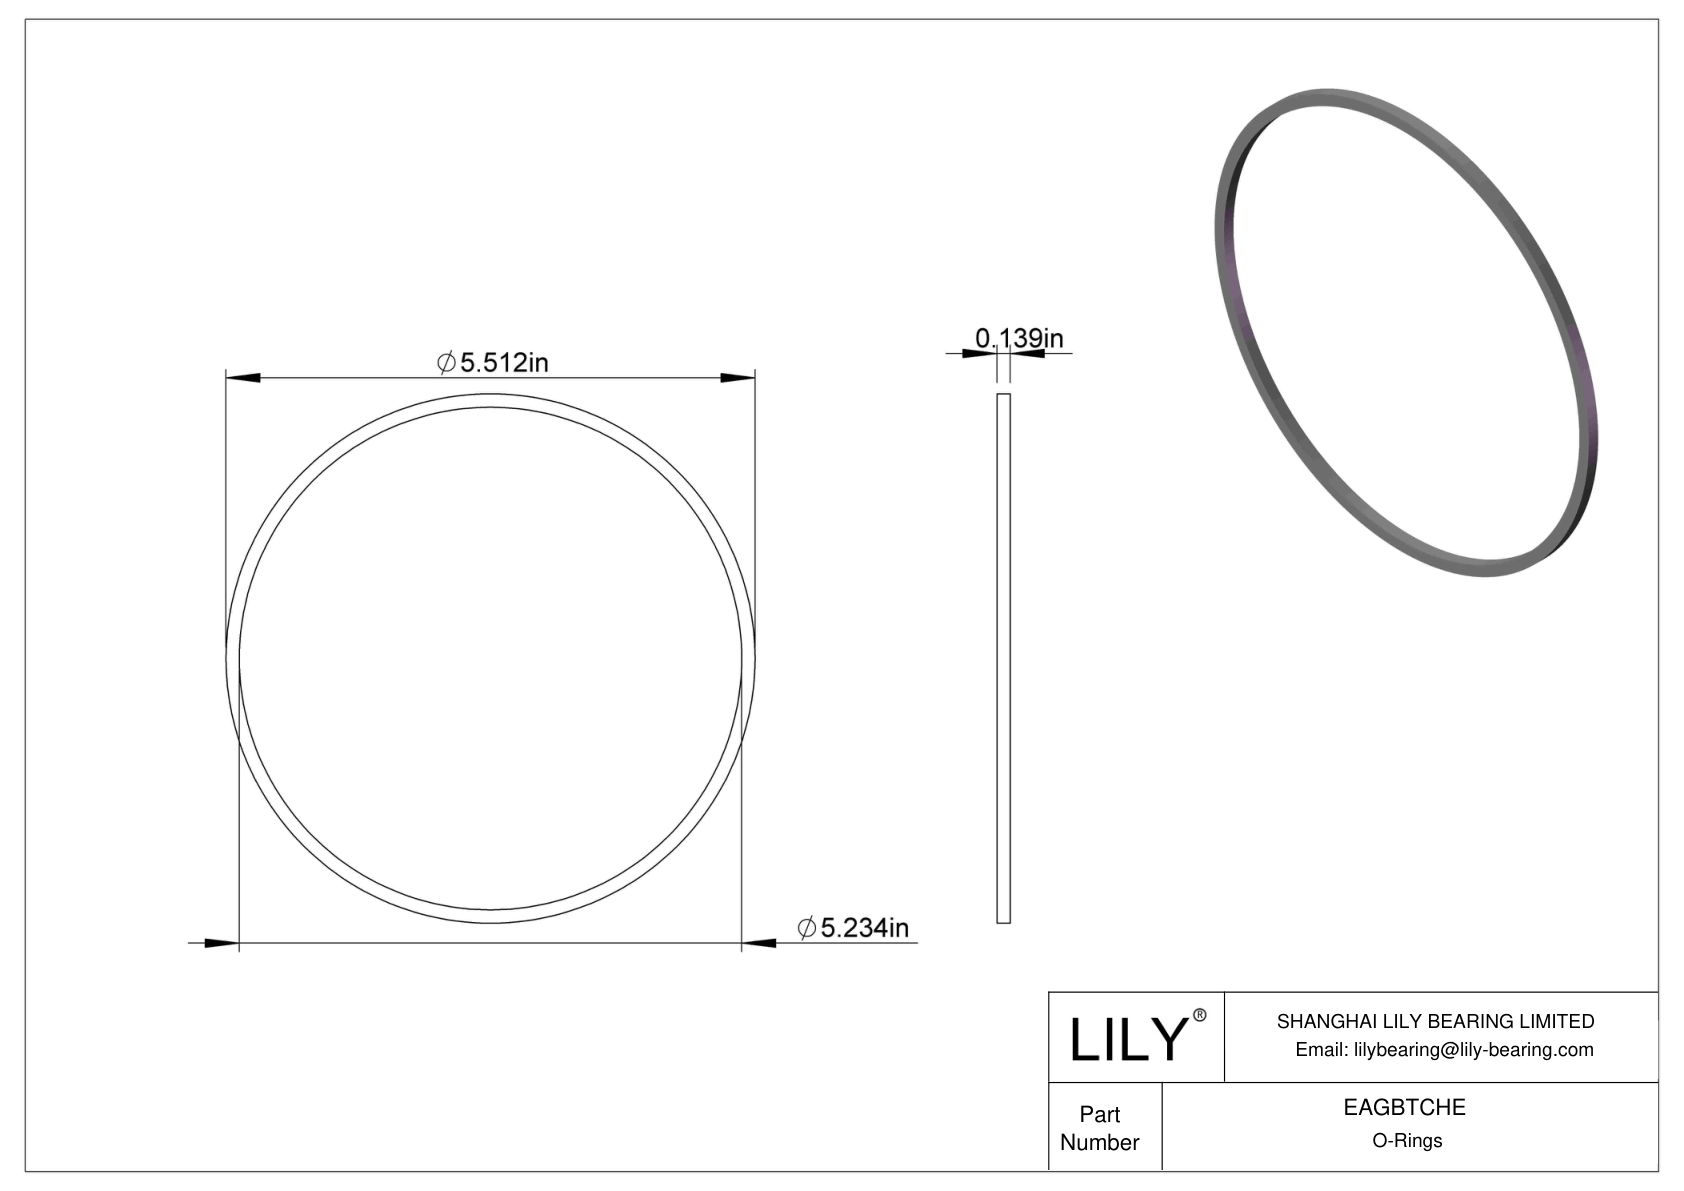 EAGBTCHE Oil Resistant O-Rings Square cad drawing